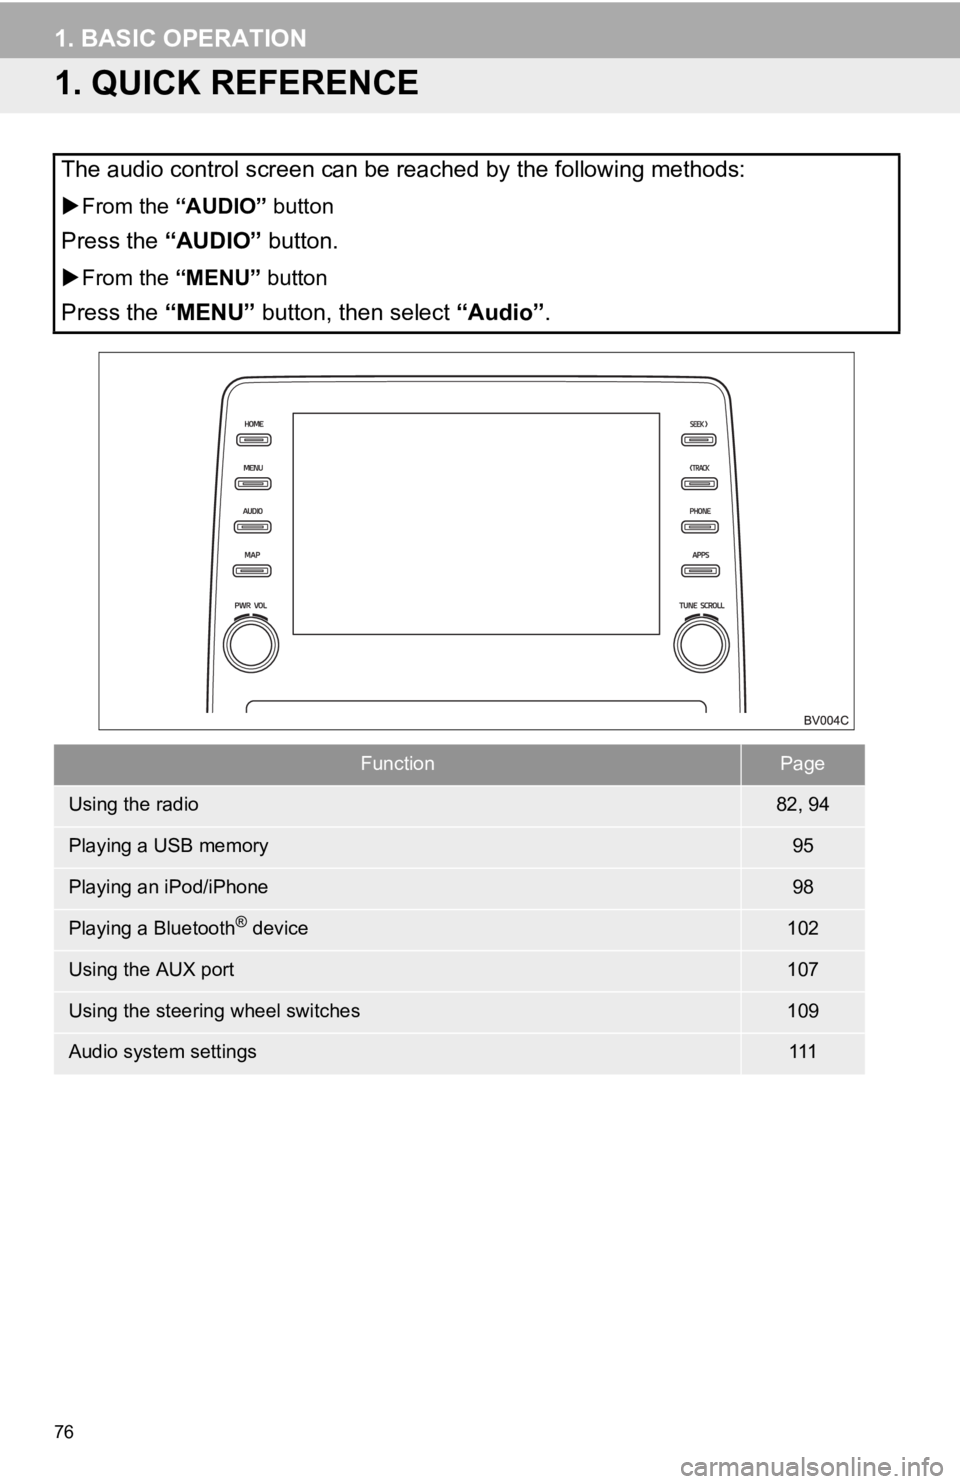 TOYOTA AVALON 2019  Accessories, Audio & Navigation (in English) 76
1. BASIC OPERATION
1. QUICK REFERENCE
The audio control screen can be reached by the following methods:
From the  “AUDIO” button
Press the “AUDIO” button.
From the  “MENU” button
